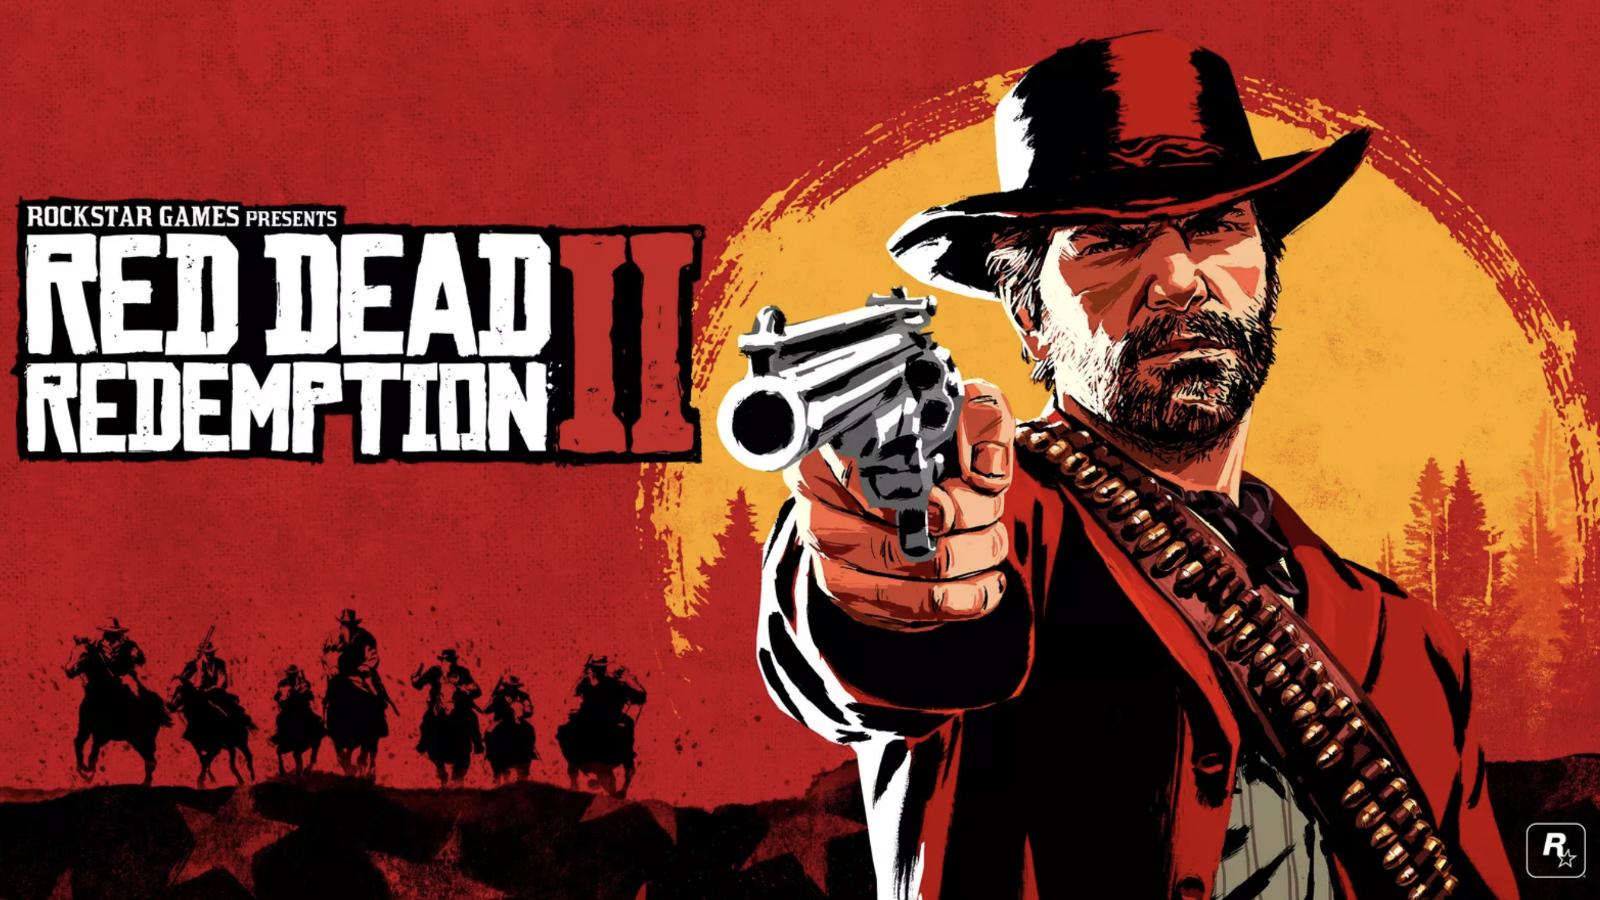 GTA 6 NEWS on X: Rockstar Games will reportedly reveal Red Dead  Redemption's remaster next month launching later this year, which wouldn't  necessarily affect GTA 6's development as it's closer to launch (